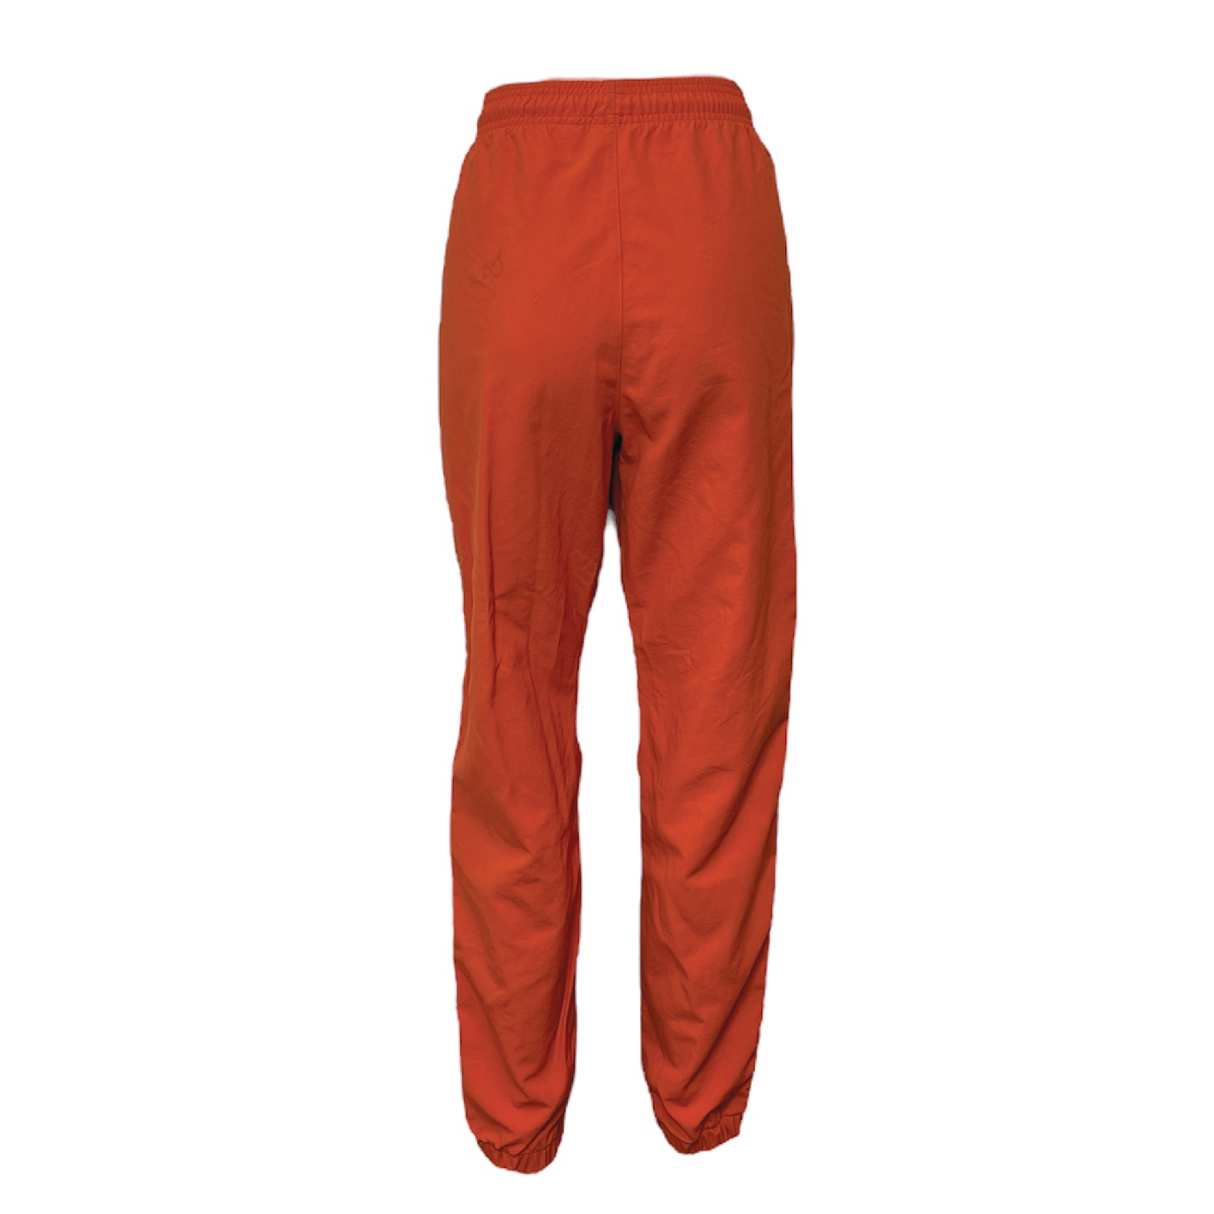 A Second Chance - Adidas Sky Pant Orange S women - Delivery All Over Lebanon